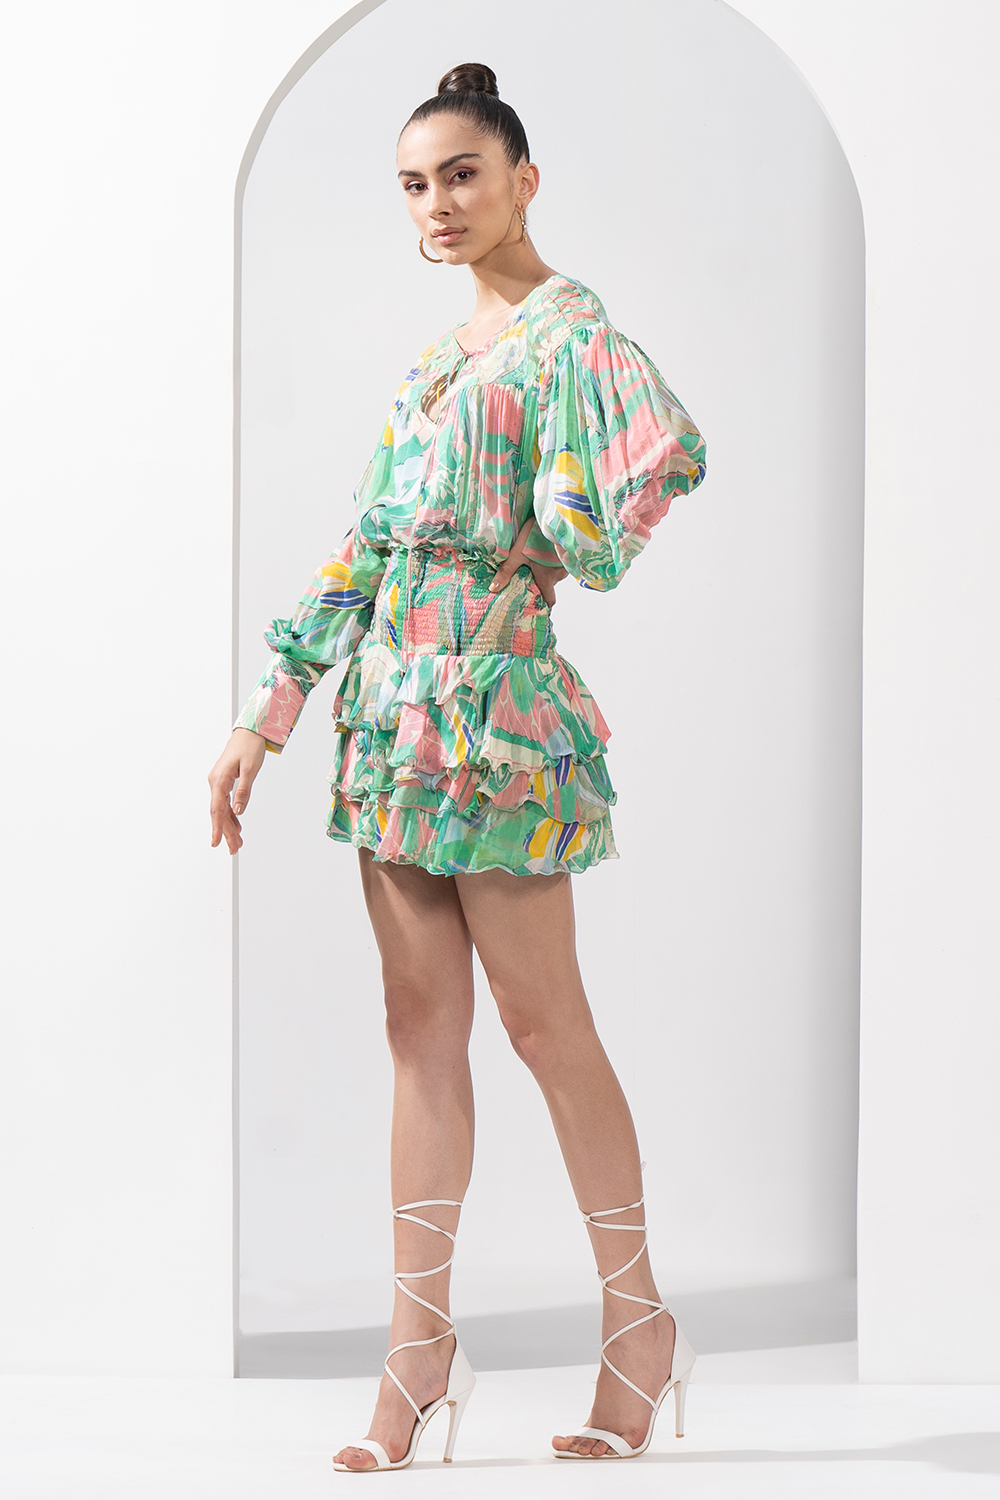 Mint & Pink Abstract Printed Top & Skirt Chiffon Set With Cutwork Chantley Detailing 